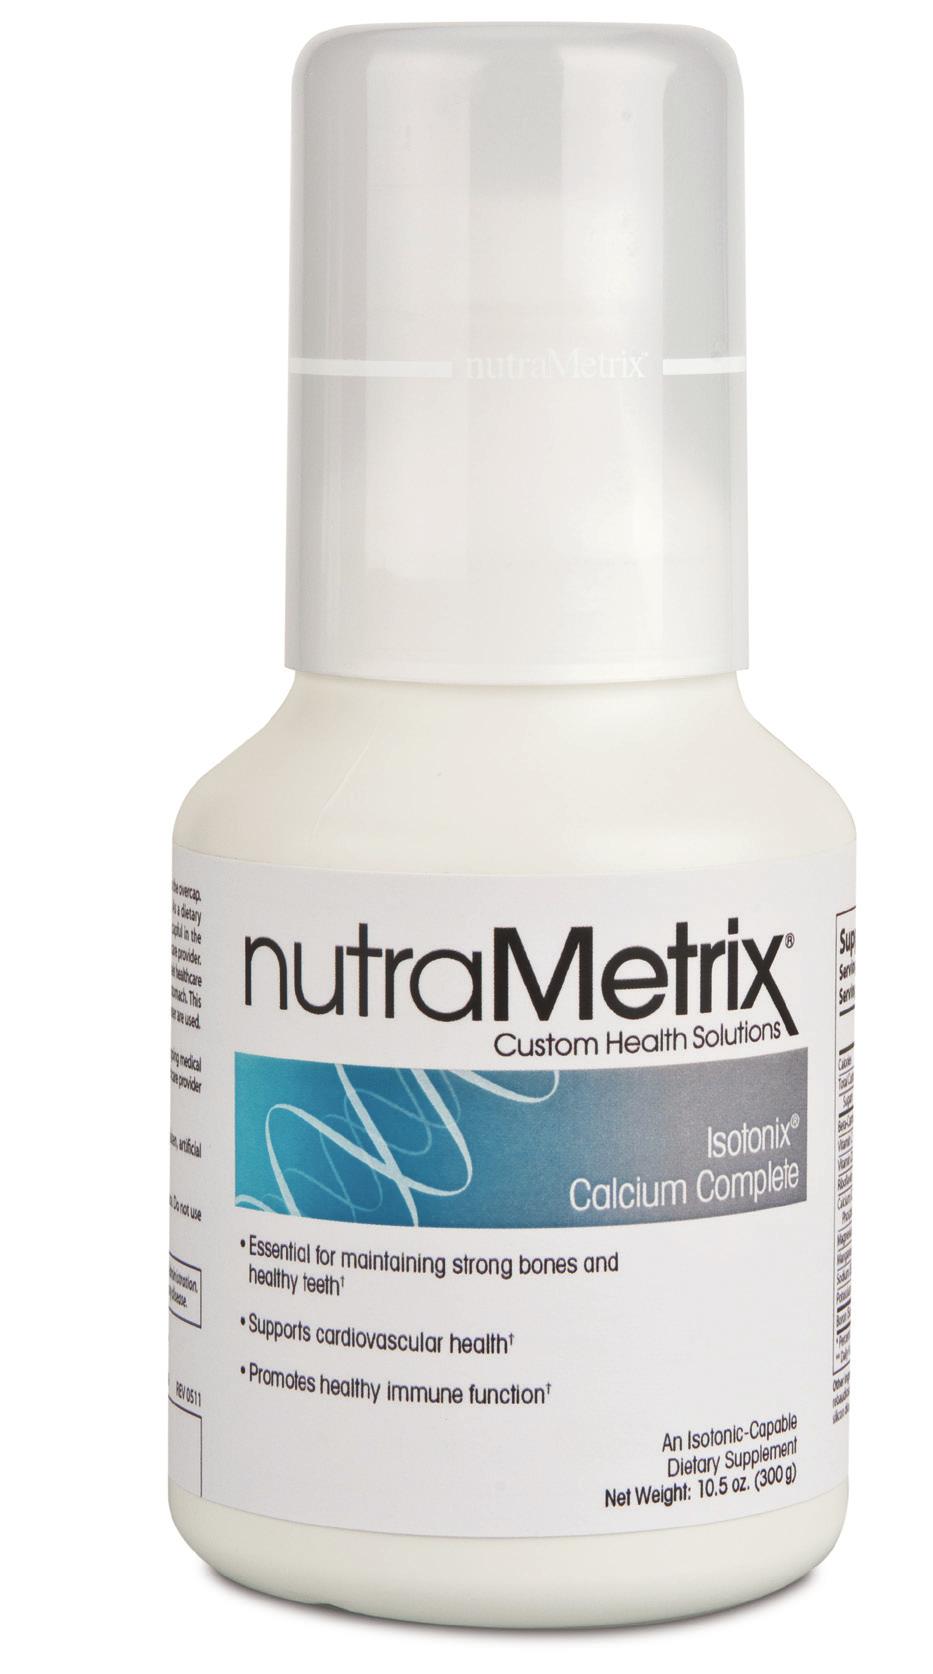 nutrametrix Isotonix Calcium Complete Essential for maintaining strong bones and healthy teeth Adequate calcium and vitamin D as part of a healthful diet, along with physical activity, may reduce the